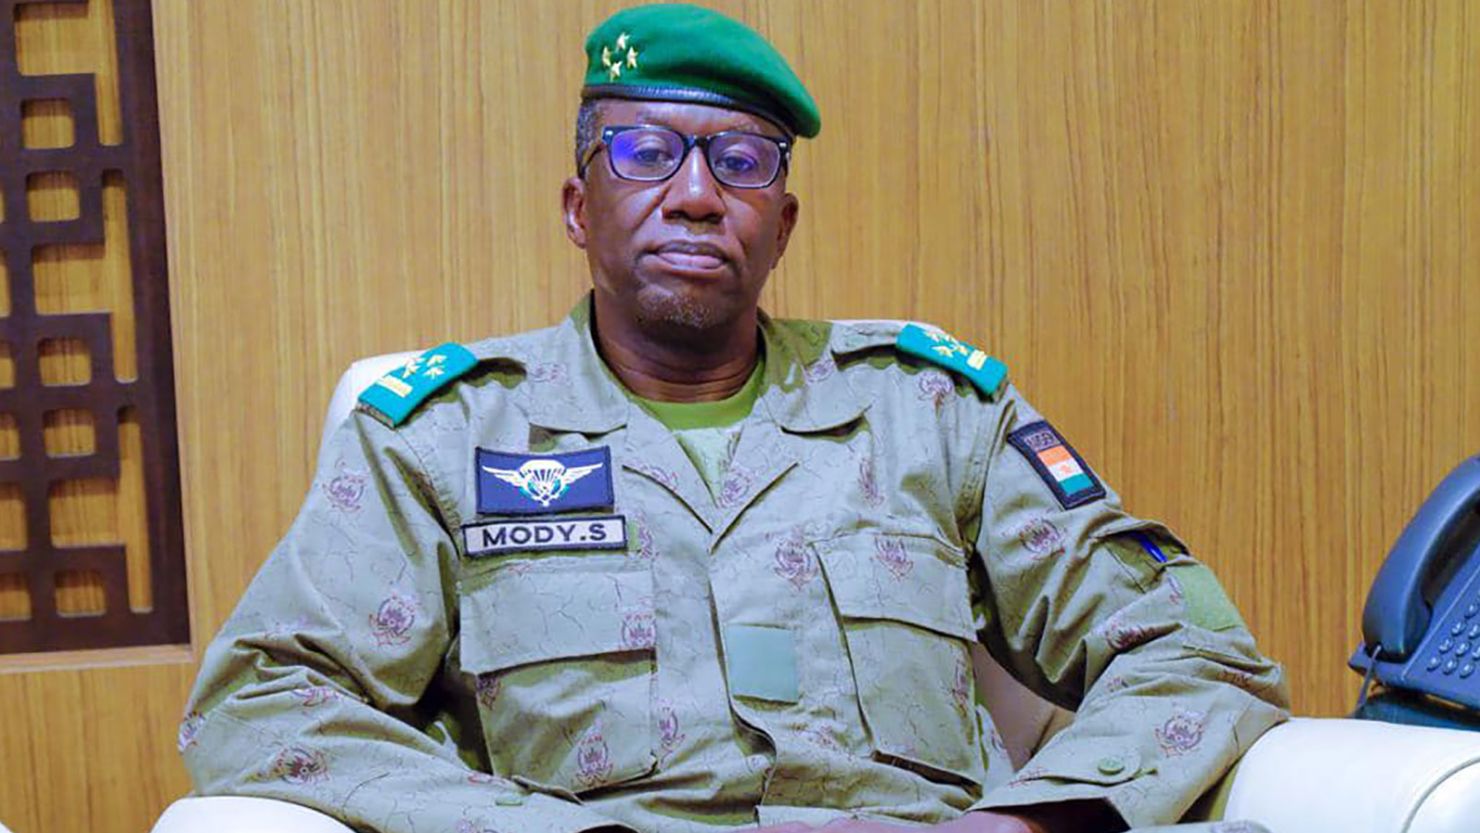 General Salifou Mody during his visit to Mali on Wednesday, August 2. 